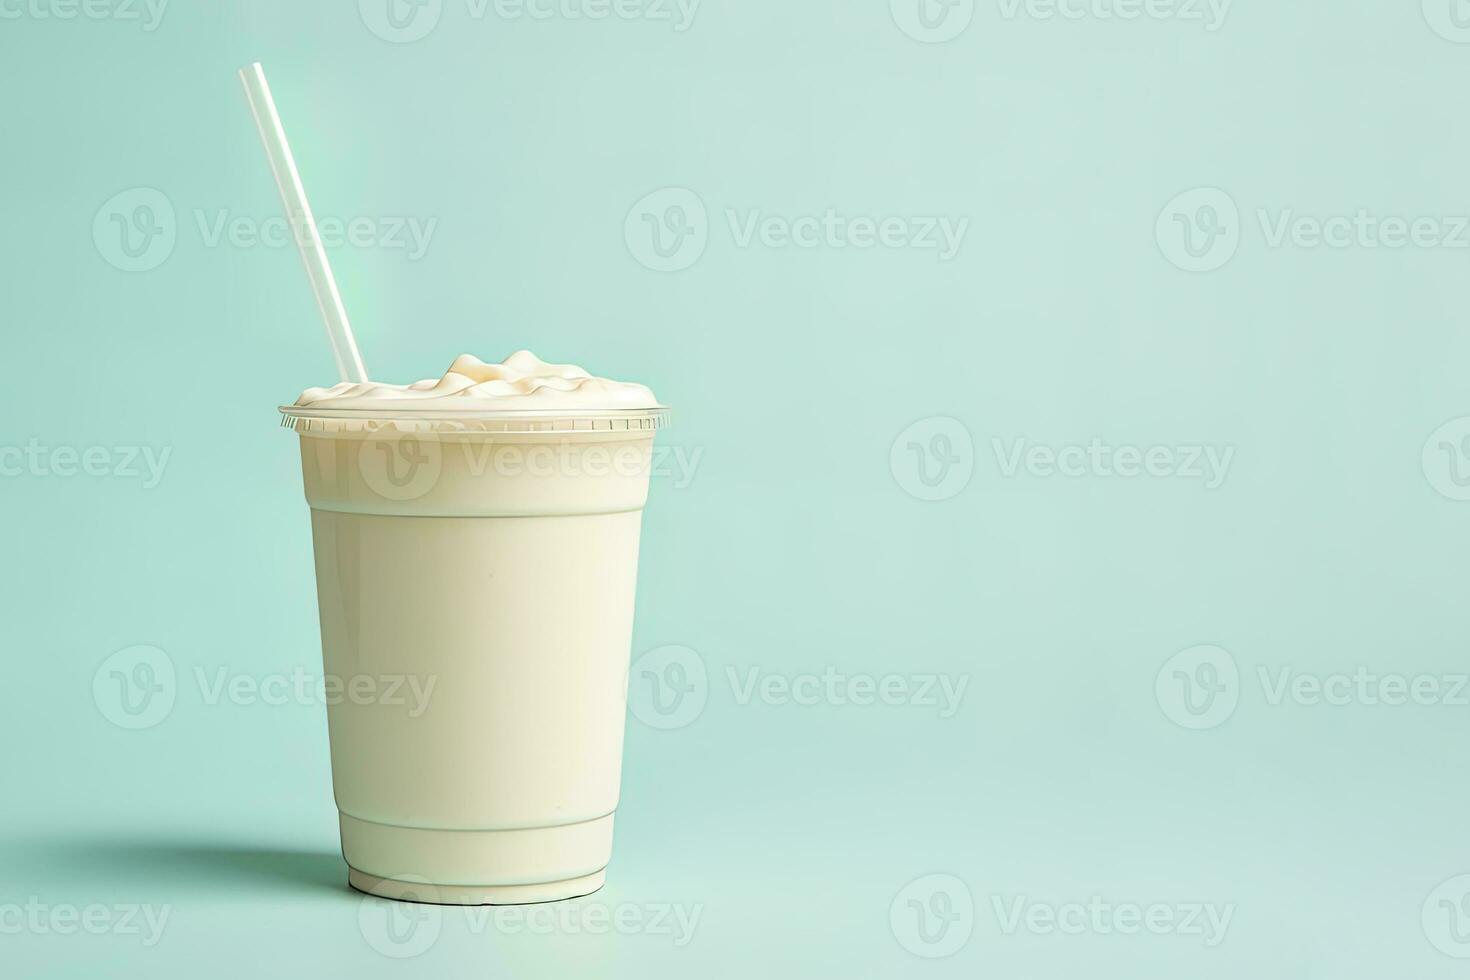 https://static.vecteezy.com/system/resources/previews/026/277/916/non_2x/vanilla-milkshake-in-plastic-takeaway-cup-isolated-on-pastel-background-with-copy-space-ai-generated-photo.jpg